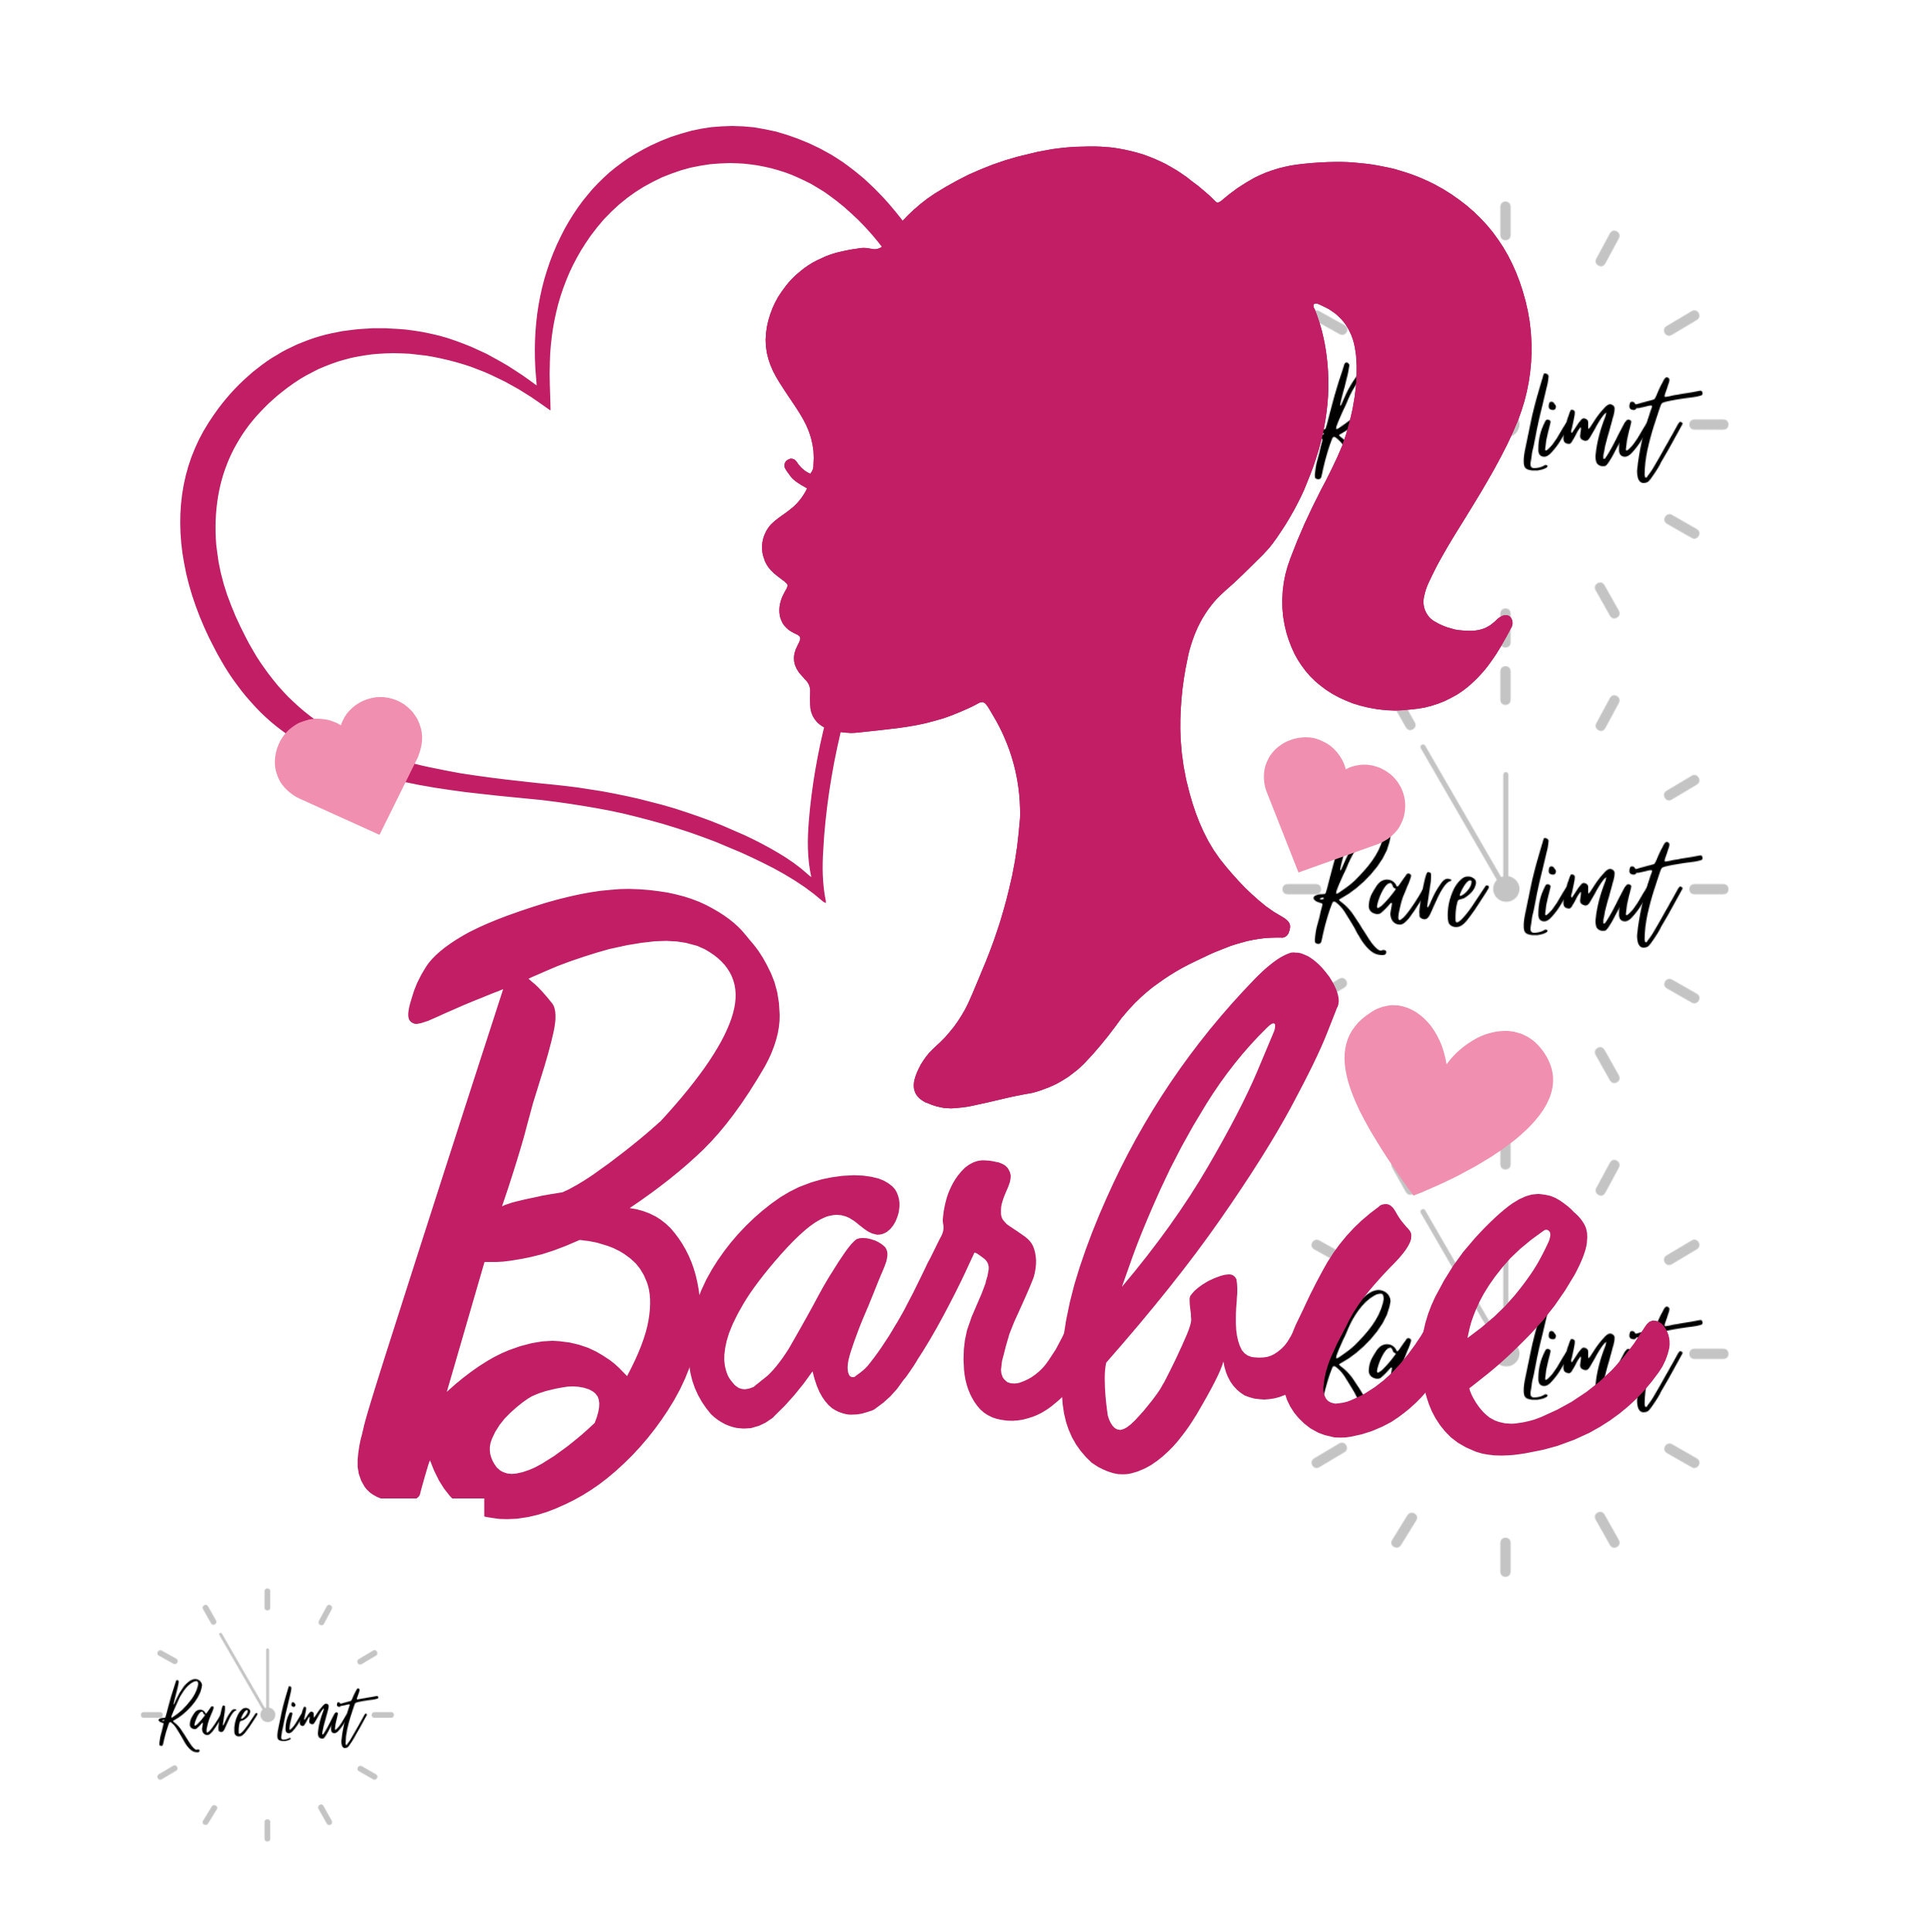 Cross Stitch Font Barbie in 3 Sizes Printable and Pattern Keeper